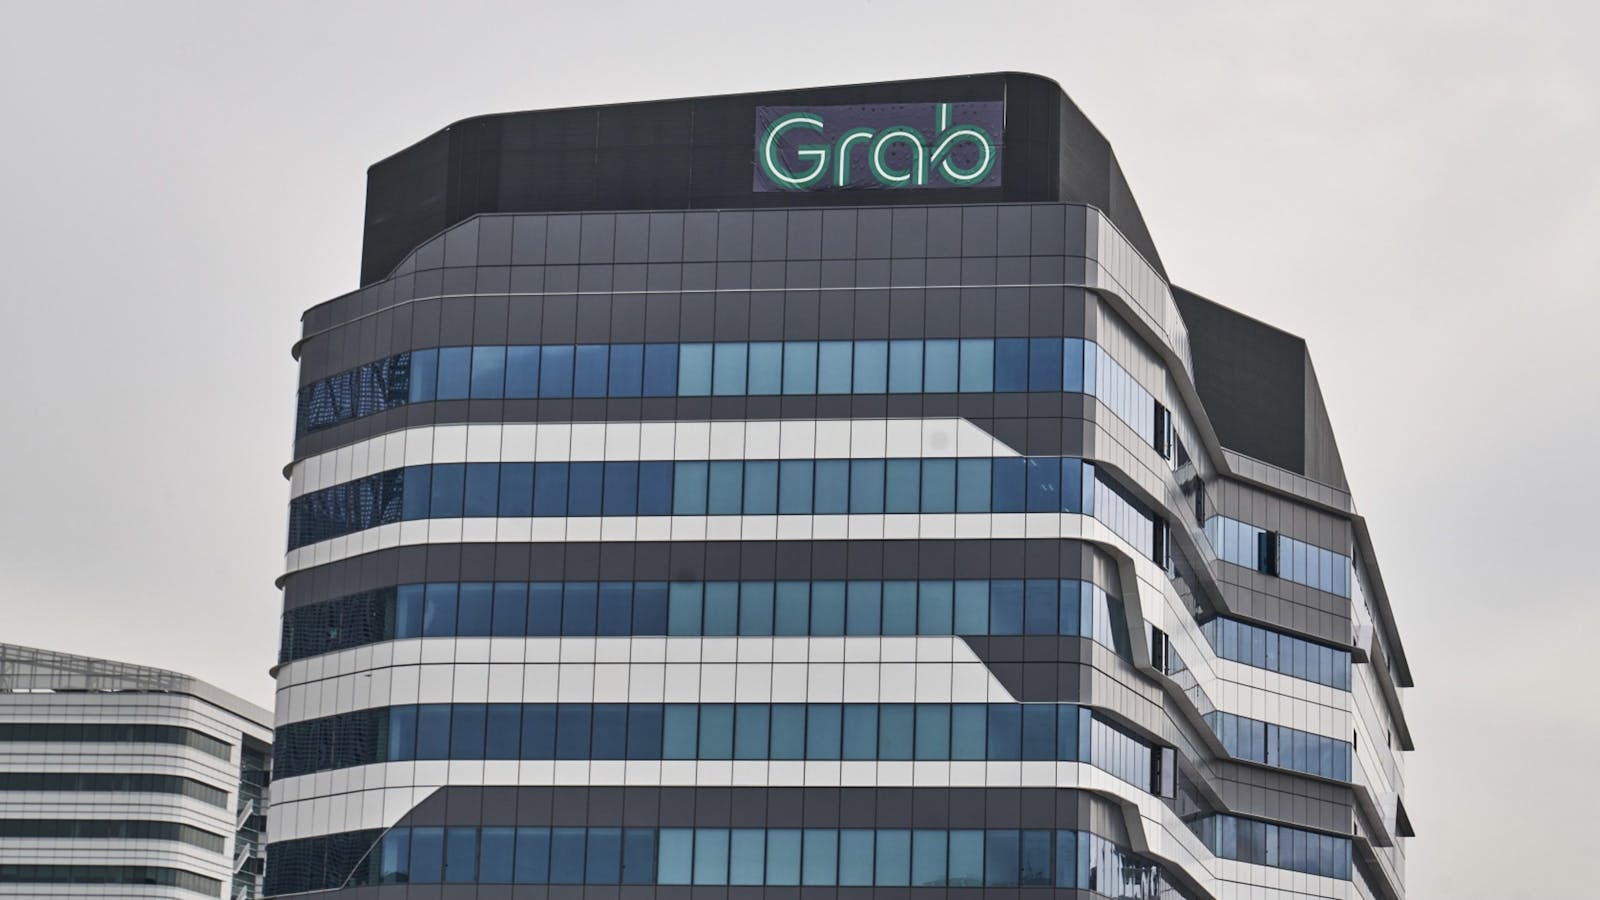 Grab's headquarters being built in Singapore last May. Photo by Bloomberg.